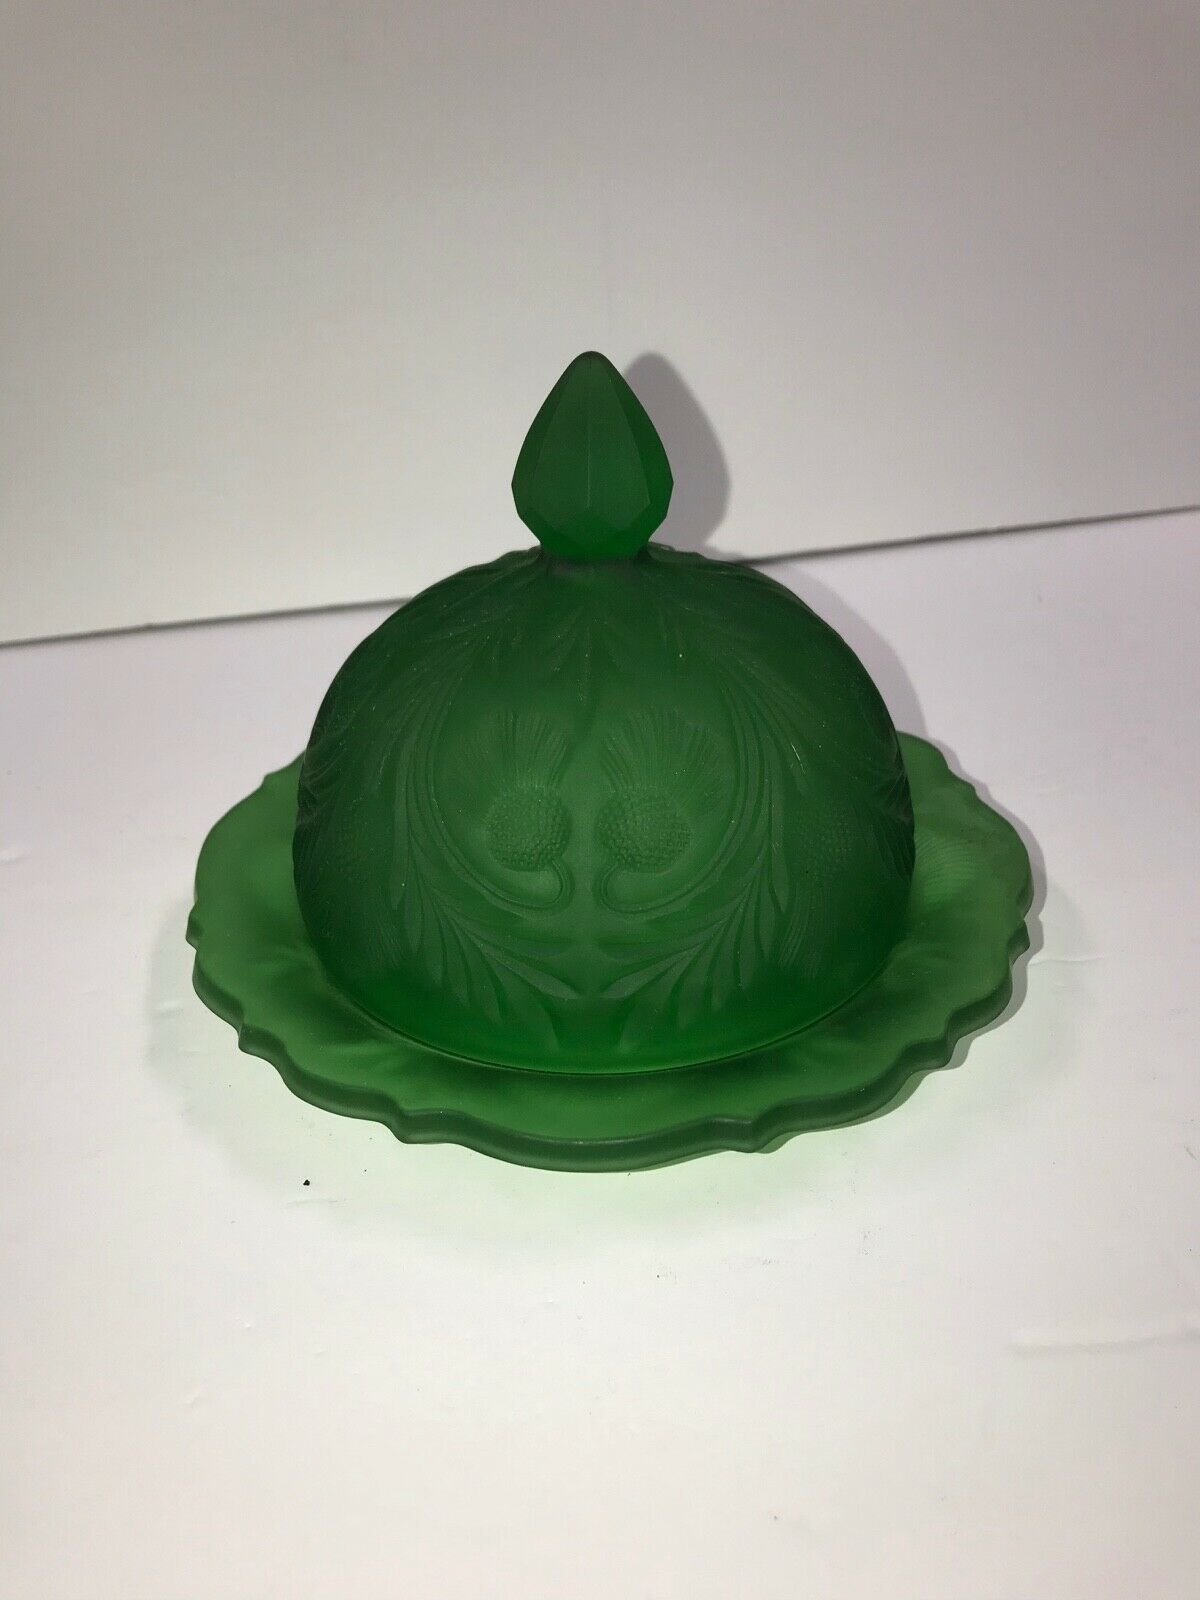 Butter Dish Or Cheese Ball Dish With Lid Emerald Green Cut Satin Glass Thistle